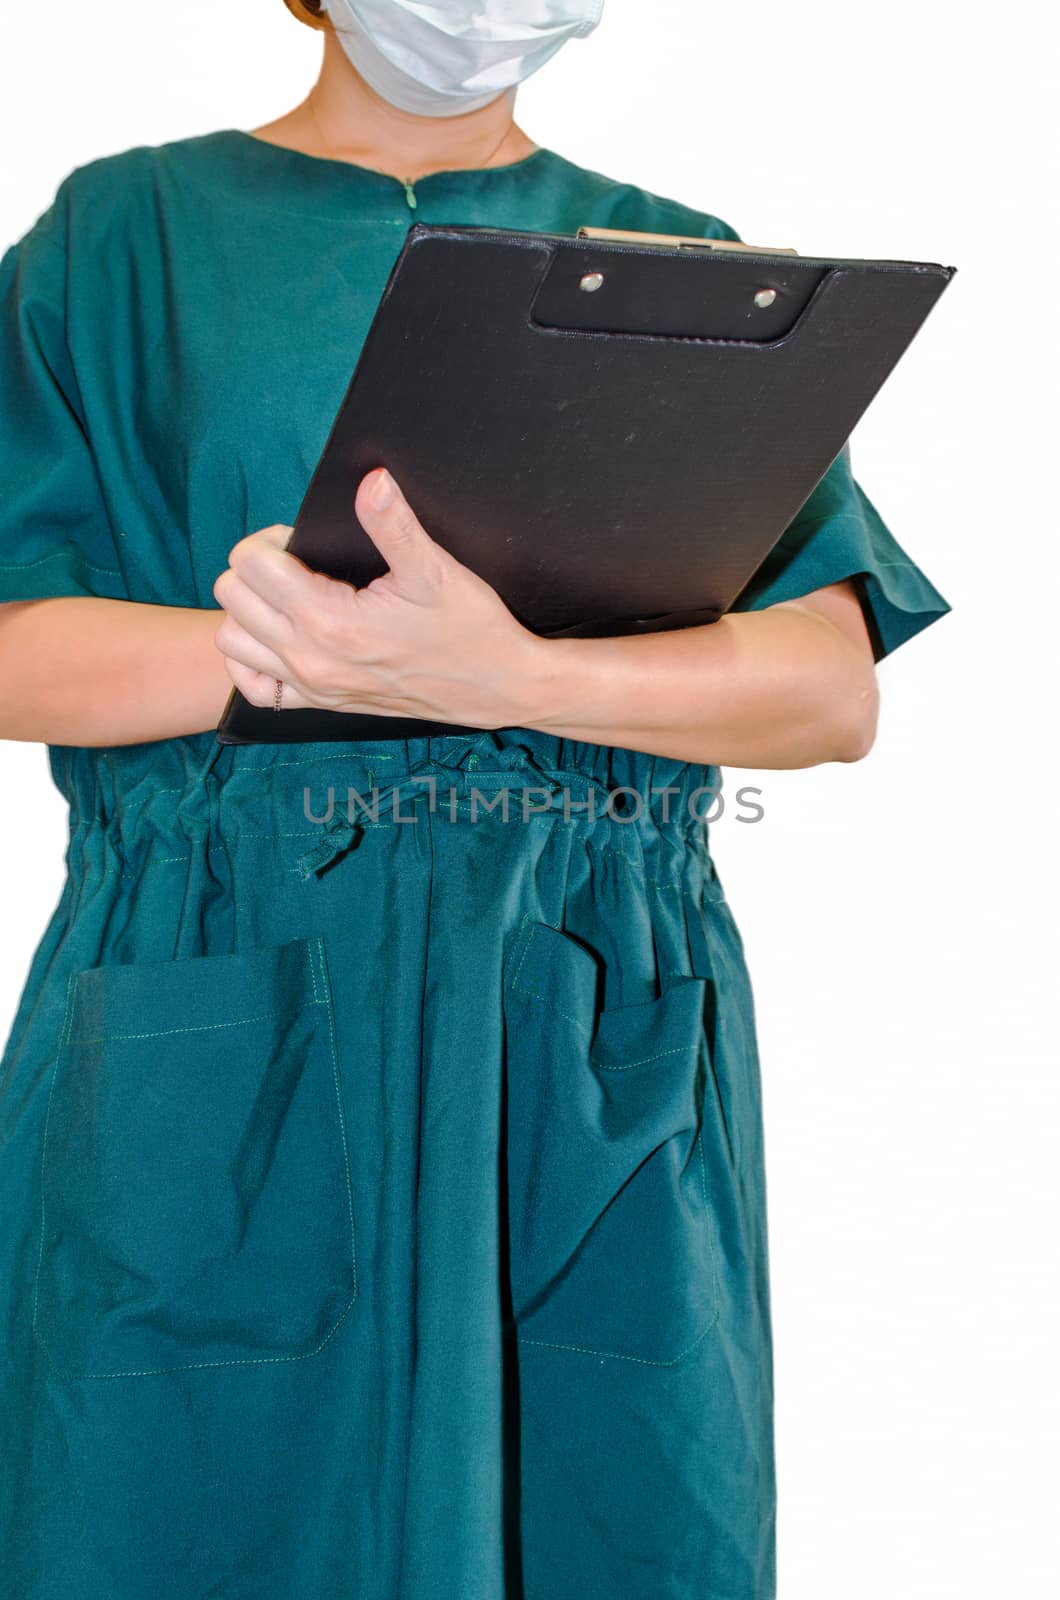 surgeon holds the document